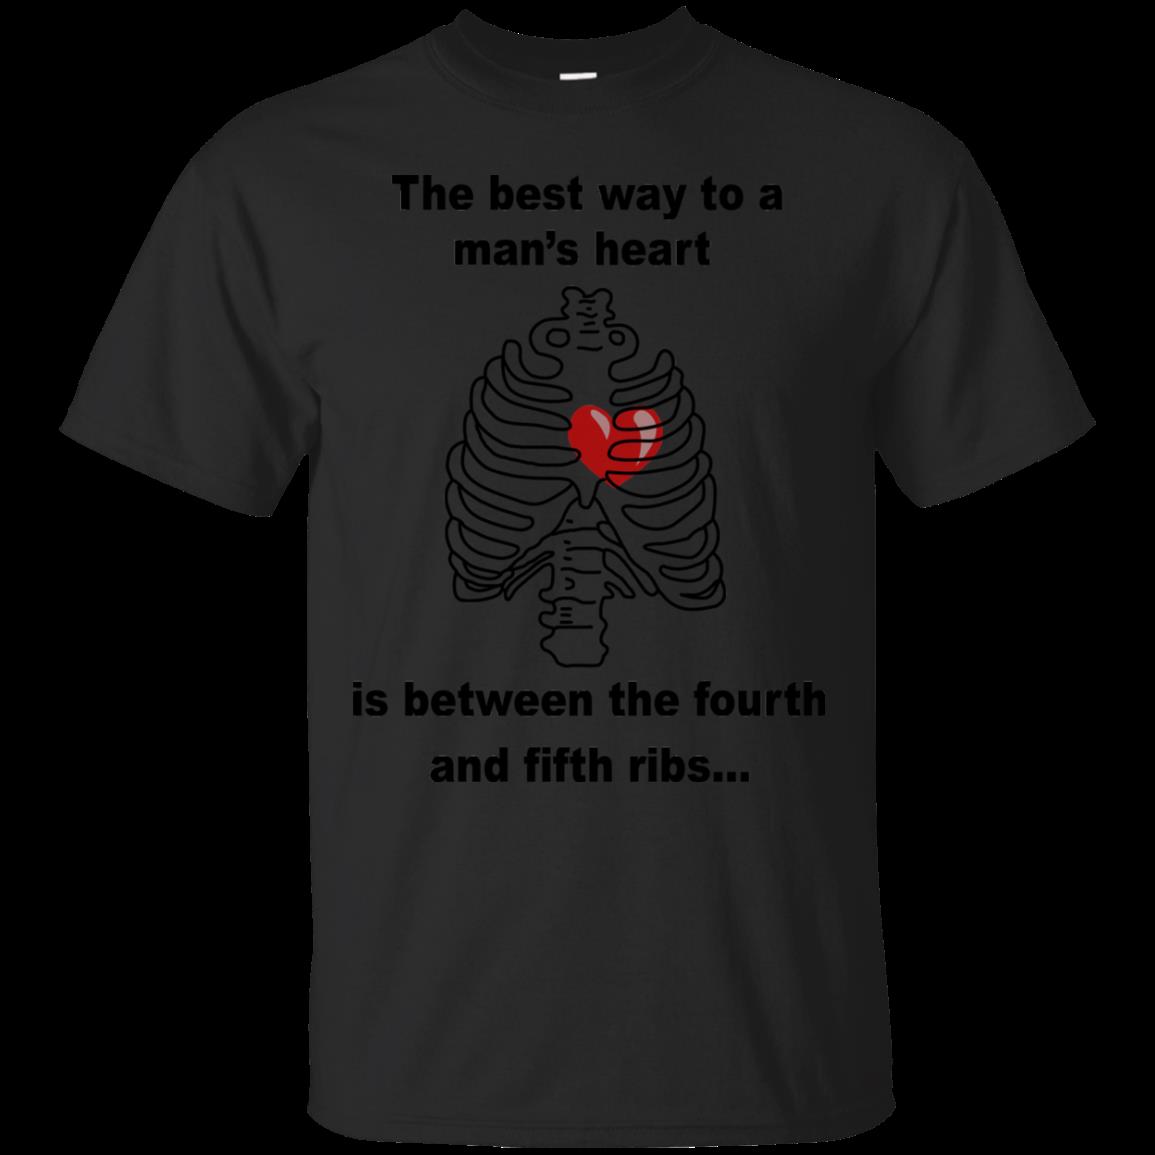 Anatomy Shirts The Best Way To A Man's Heart